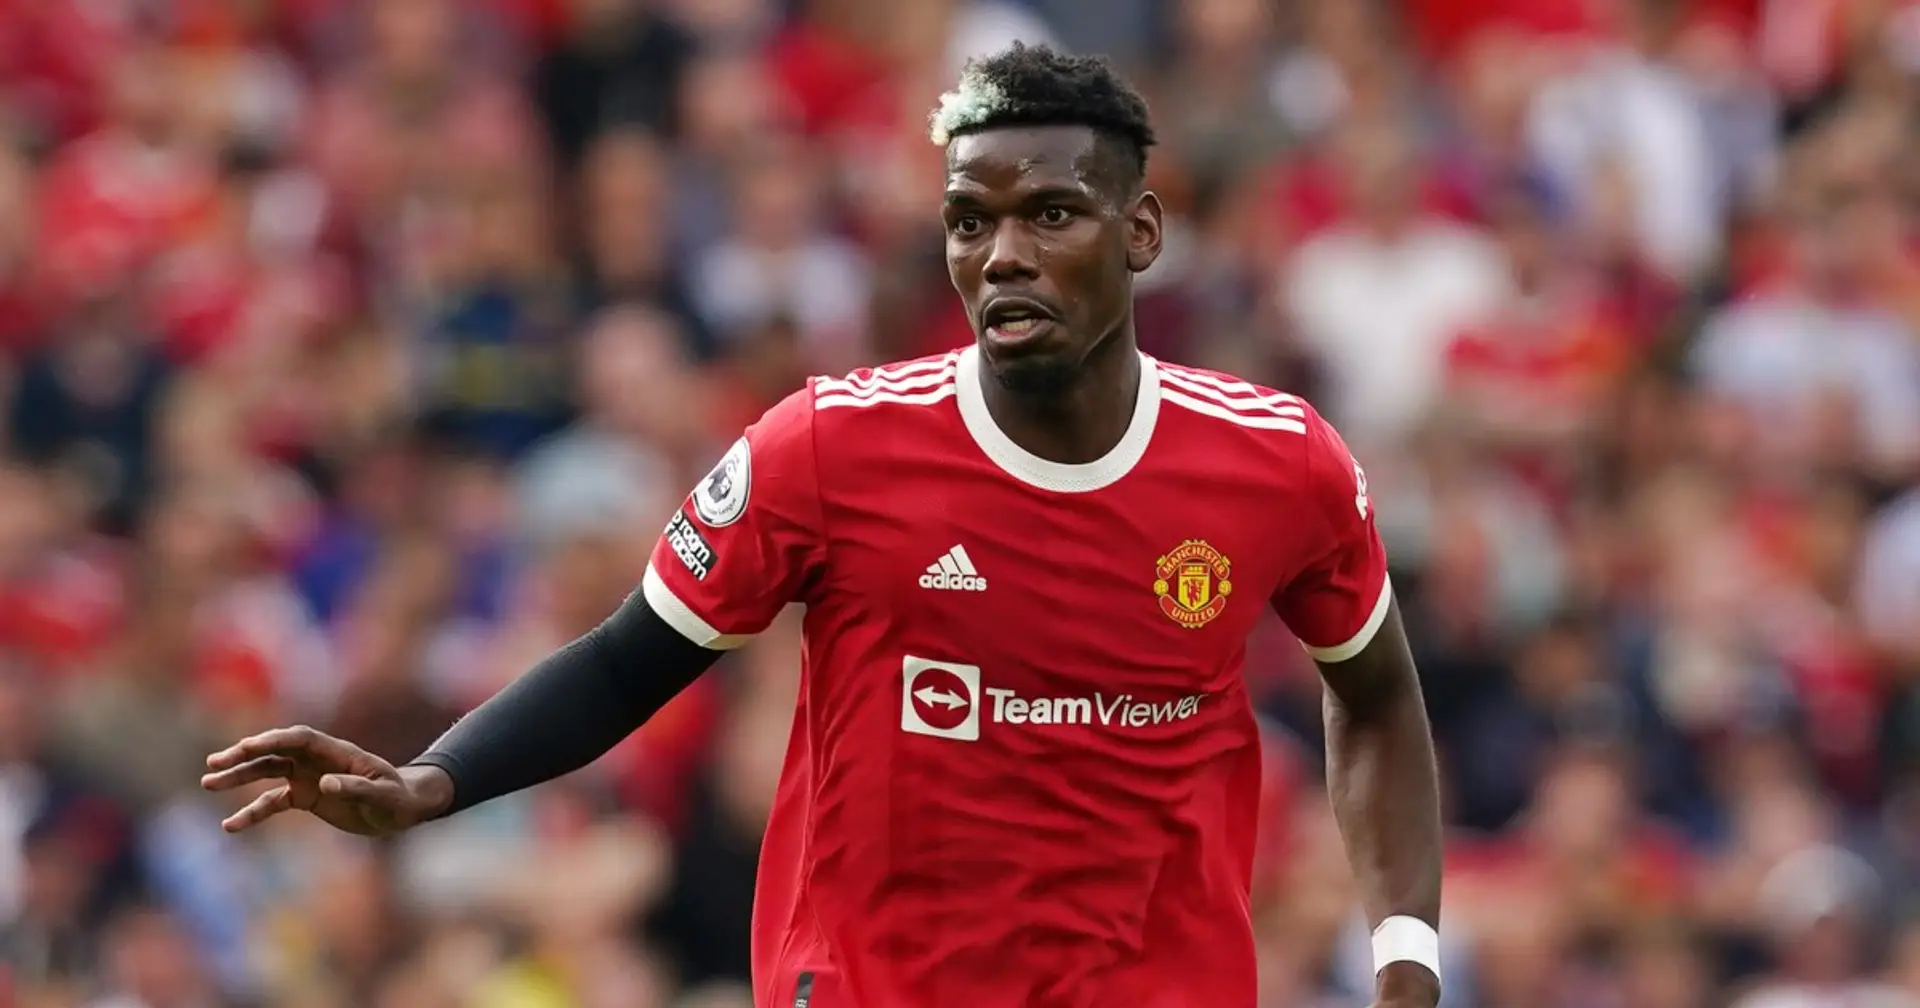 OFFICIAL: Paul Pogba leaves Man United after 6 years